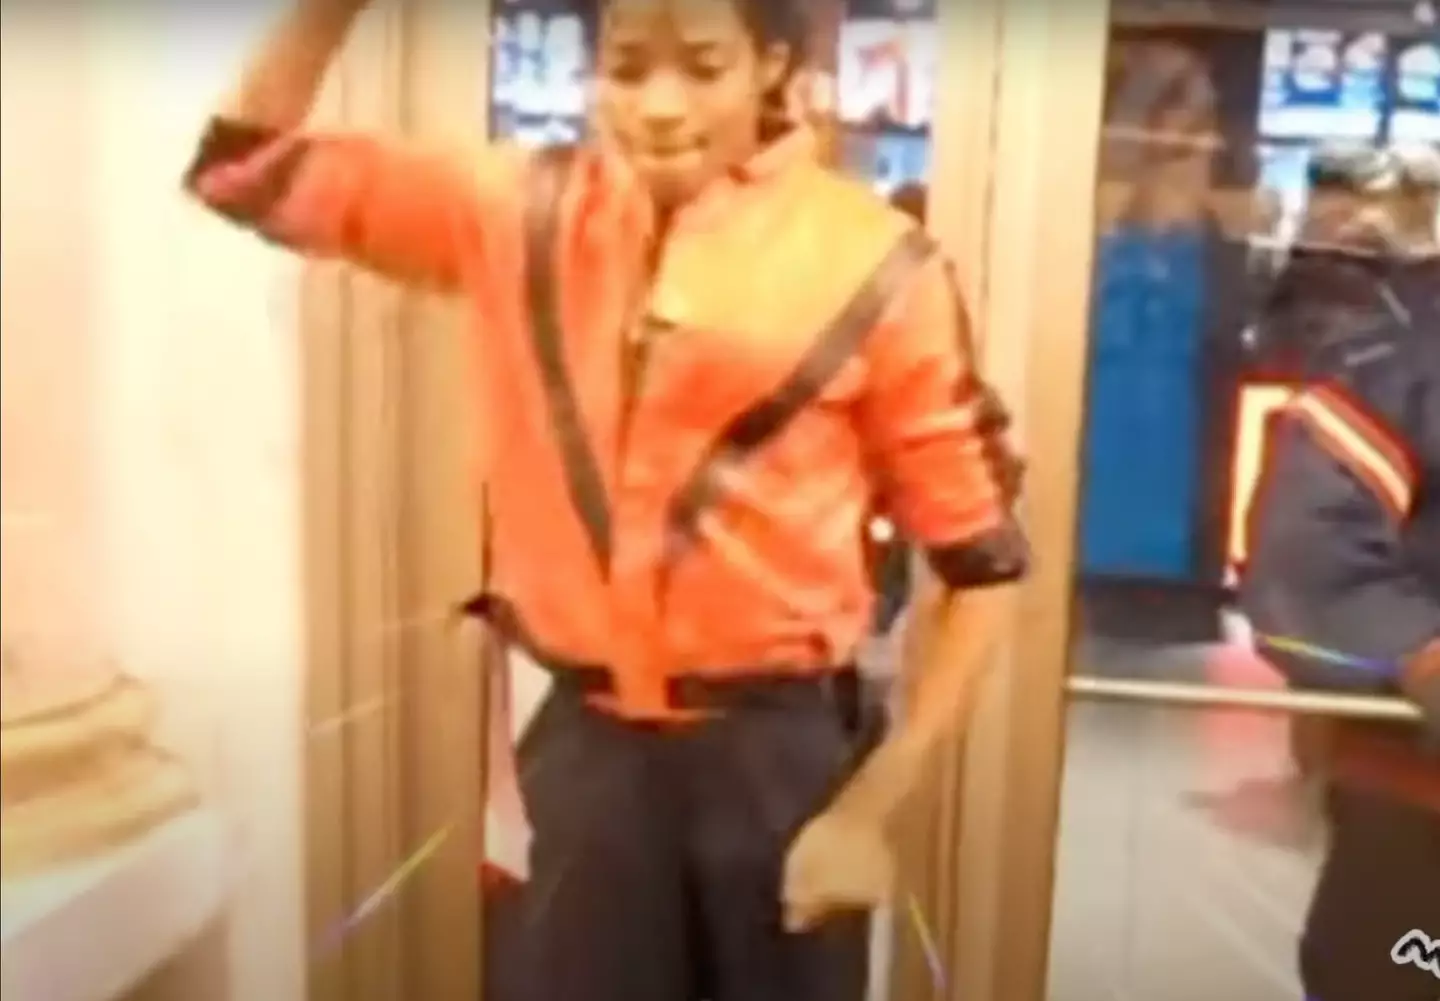 Jordan Neely had impersonated MJ since as early as 2009.